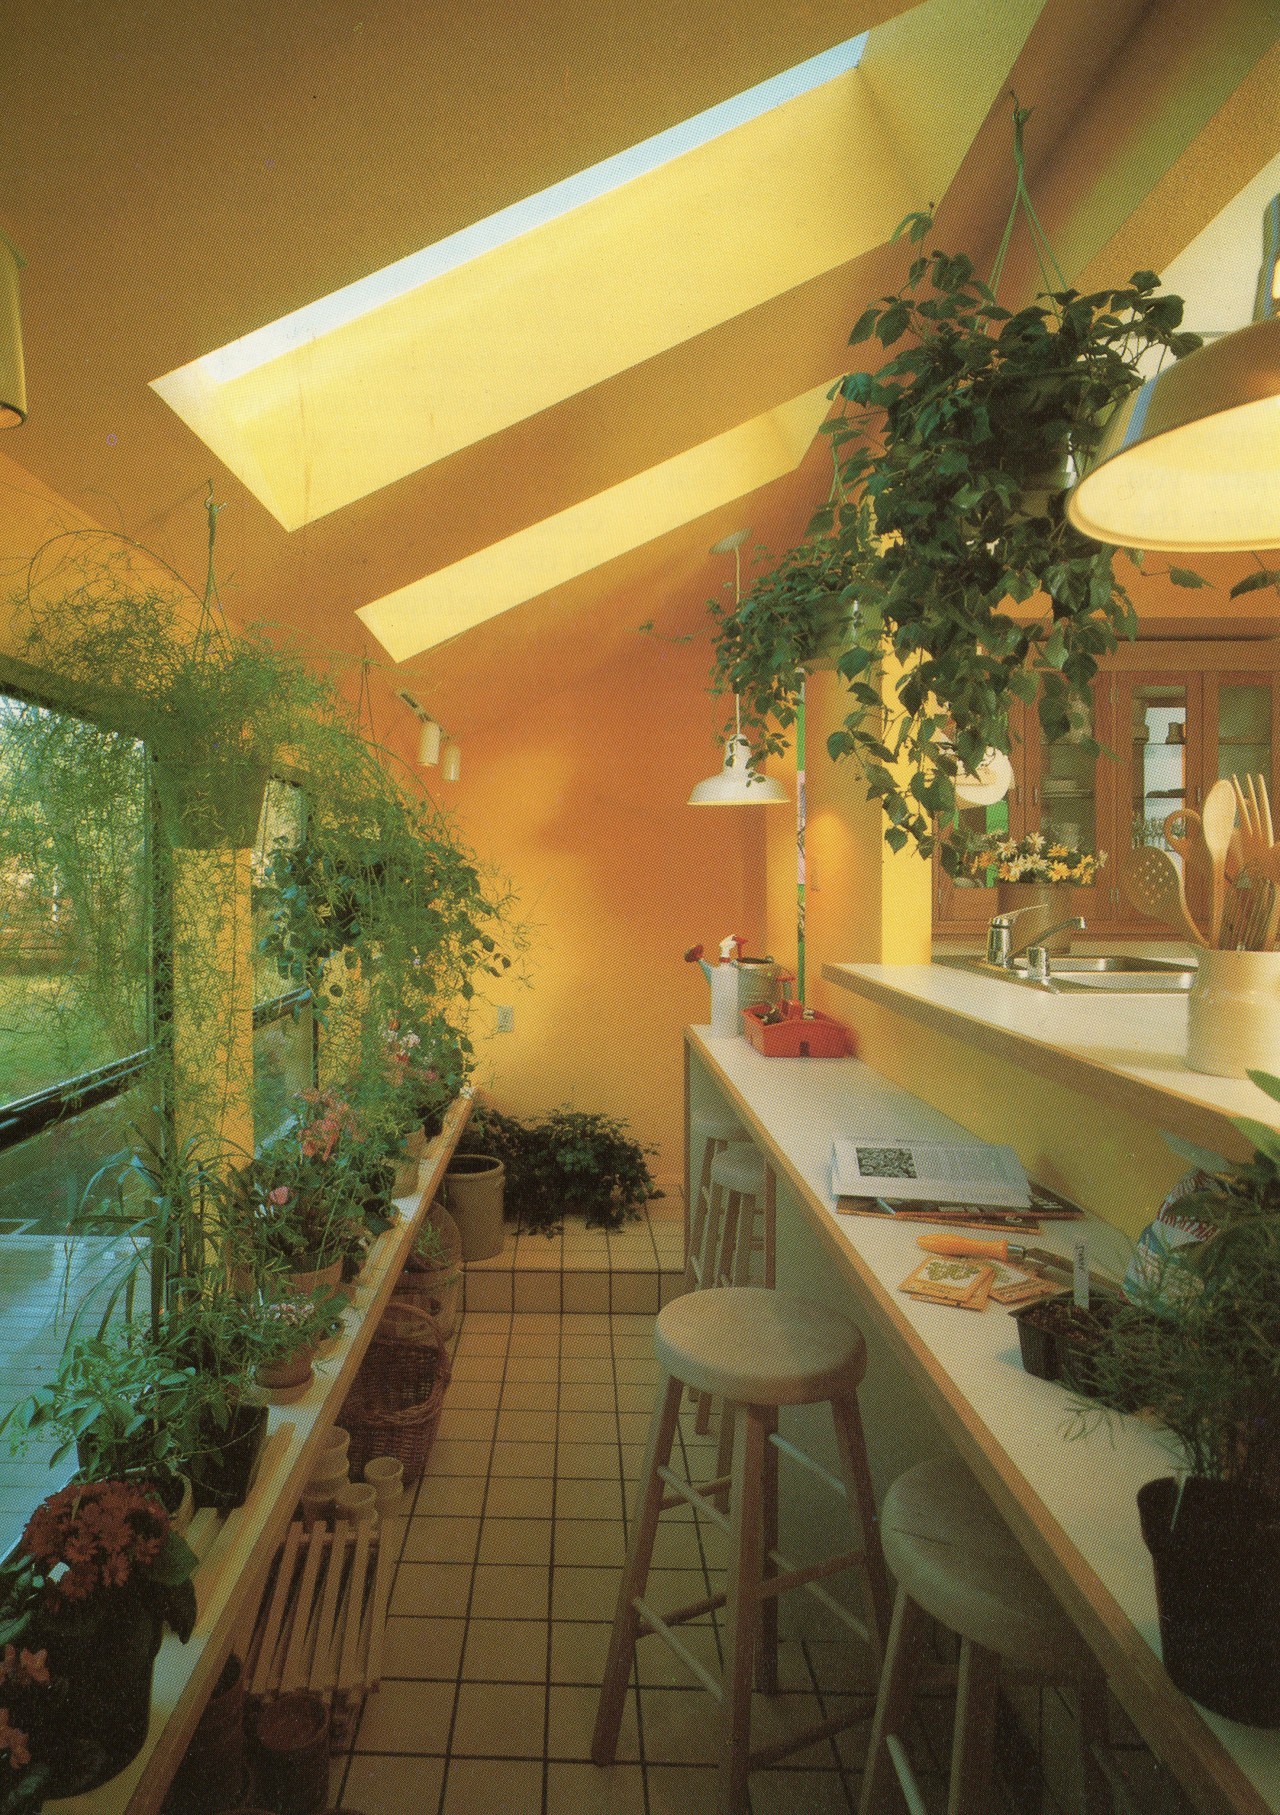 For the avid gardener, a conservatory off the kitchen area makes a lot of sense. Close to water and wash-up materials, a long narrow alcove such as this one lets you fuss with plants while keeping an eye on preparing the meals.Beyond The Kitchen: A Dreamer’s Guide, 1985 #vintage#vintage interior#1980s#interior design#home decor#conservatory#kitchen#house plants#stools#countertop#yellow#wall paint#skylight#contemporary#style#home#architecture#pendant lamp